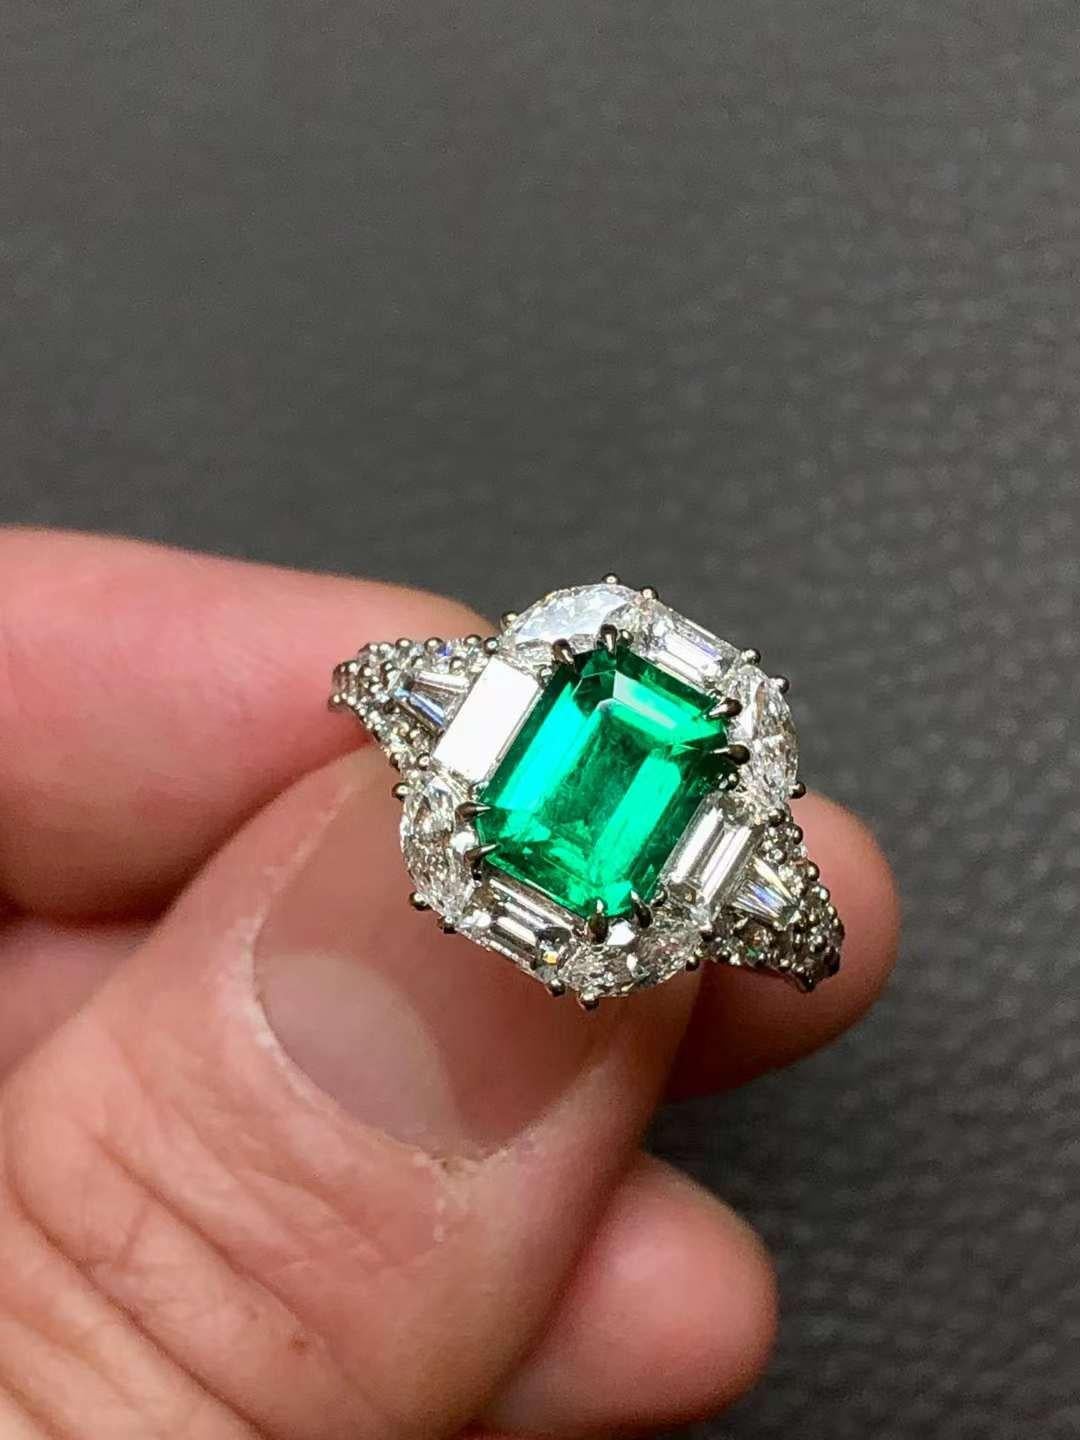 2.07 carats
Vivid green (Muzo green by GRS)
Origin: Columbia
Minor oil by GRS
Overall clarity is very good, almost eye clean
Very well cut, perfect symmetry, almost no window